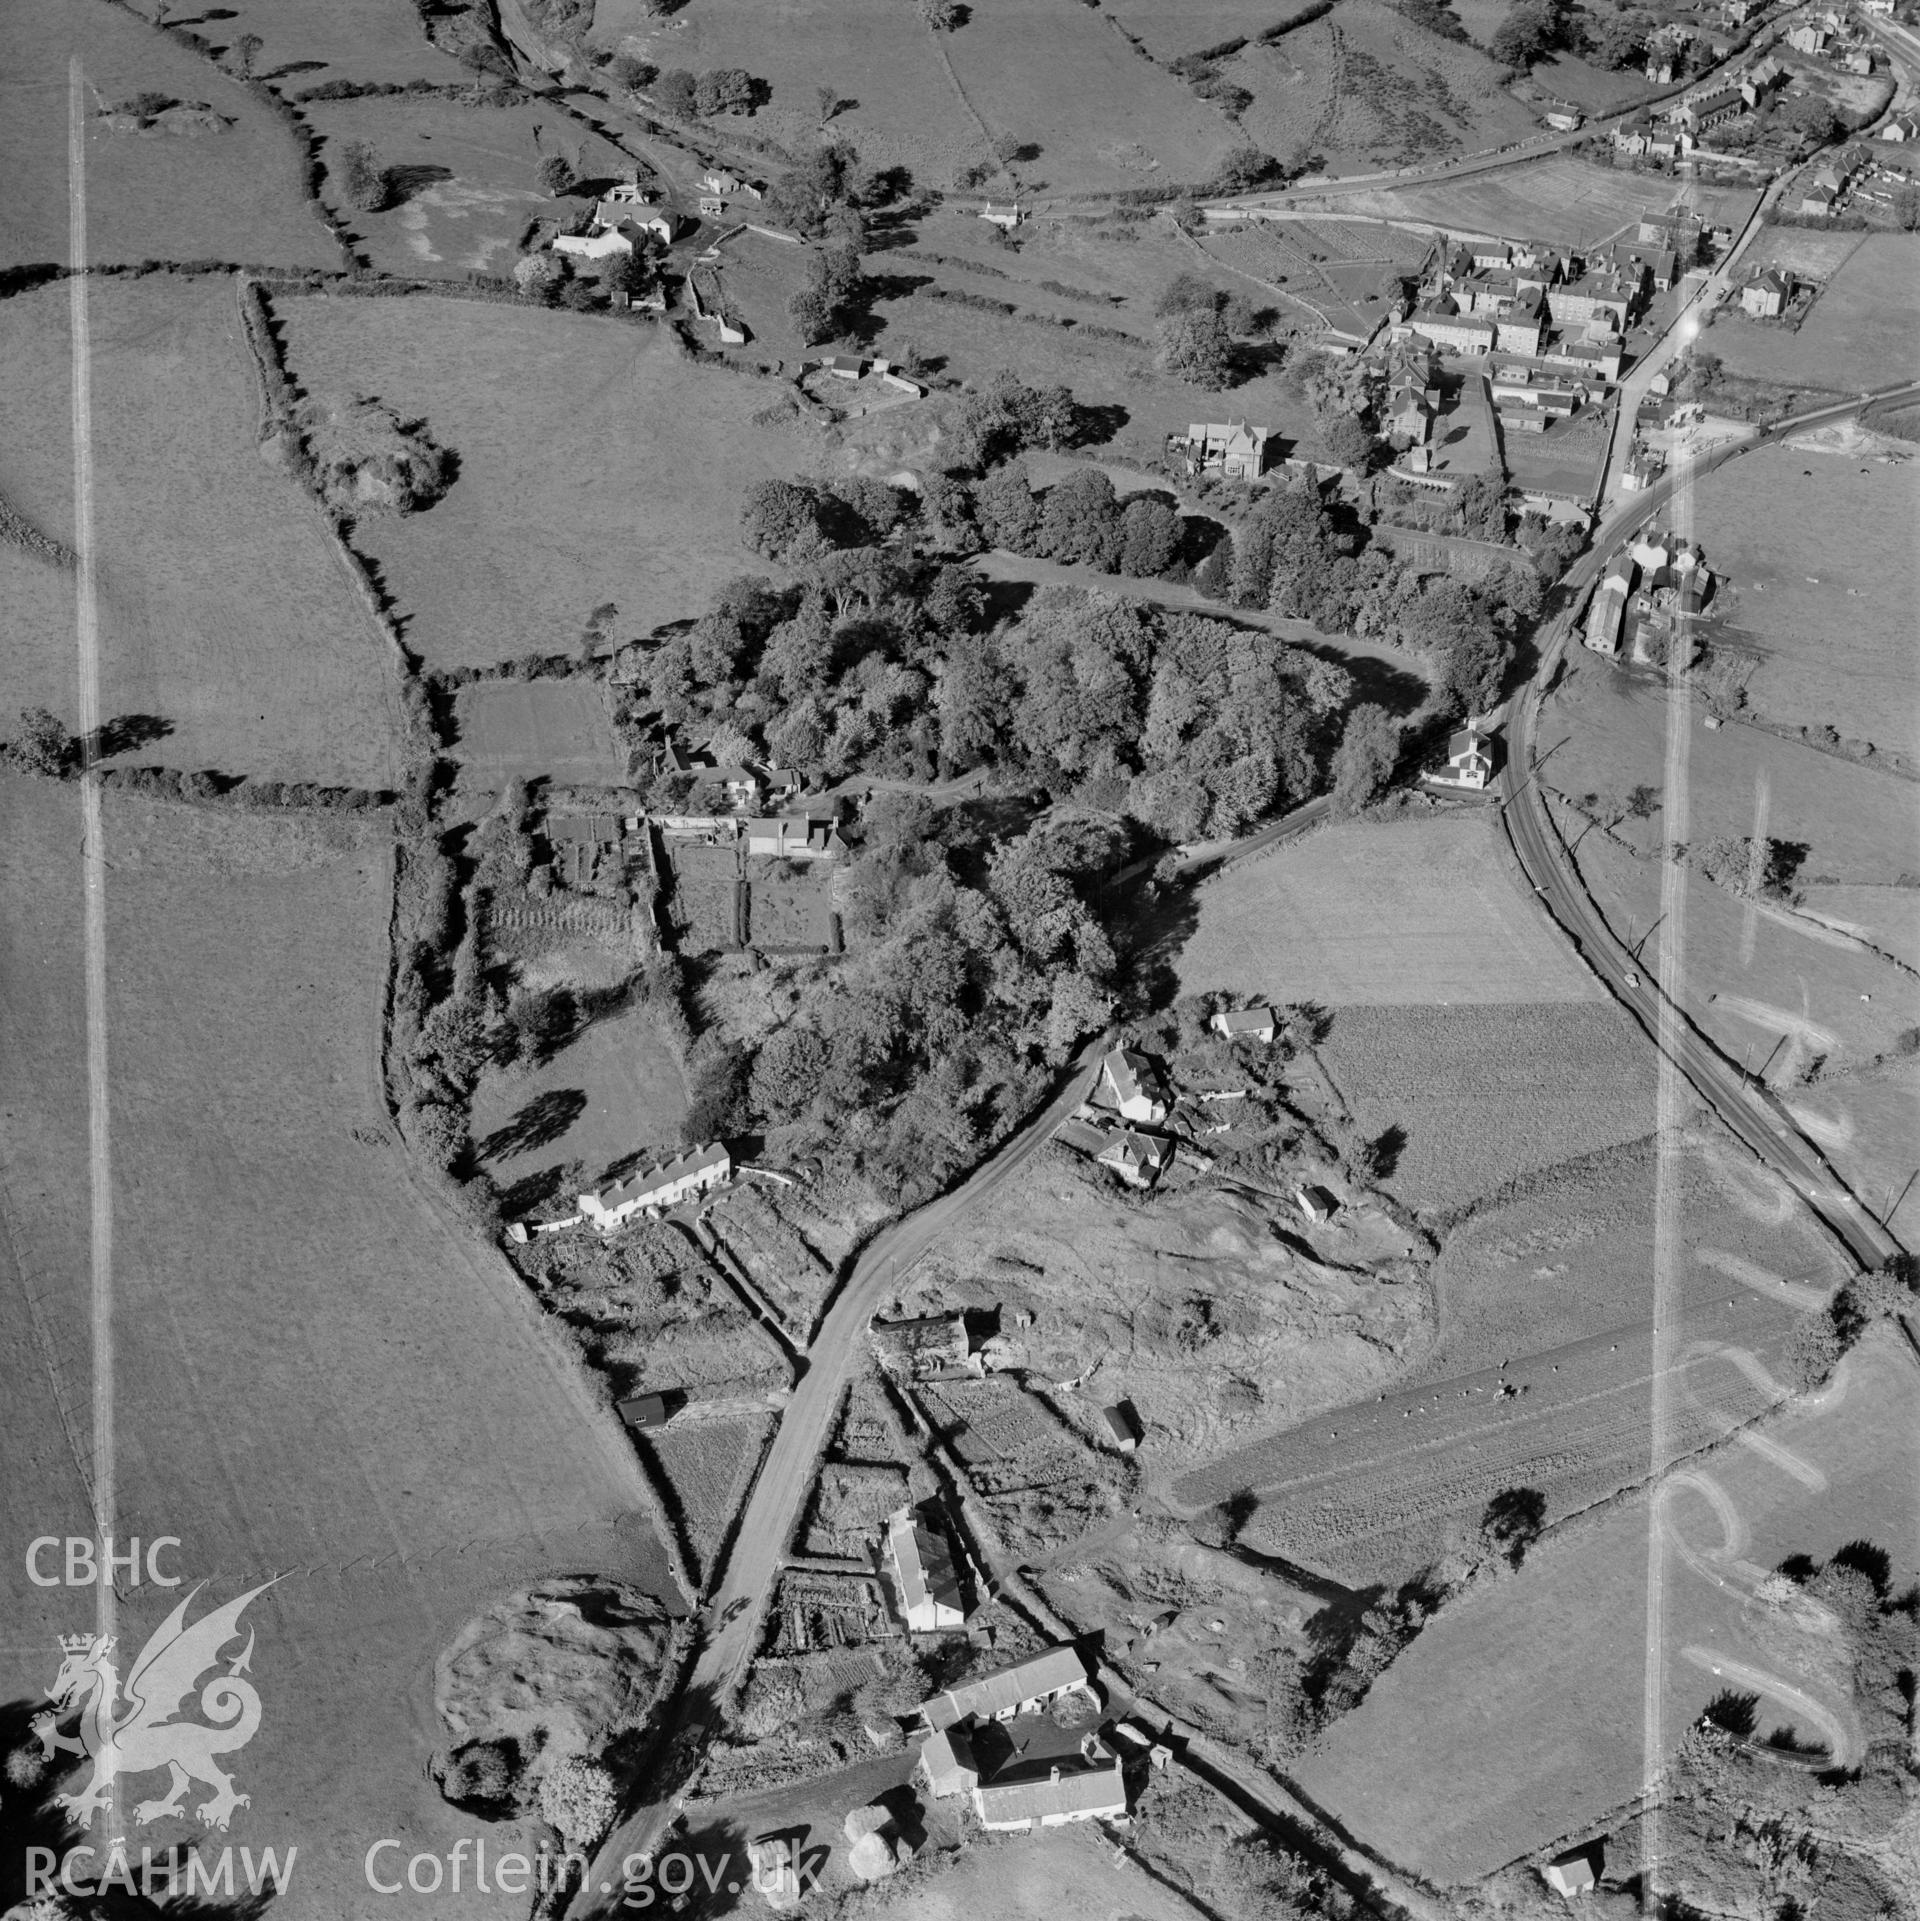 View of area south of Holywell showing Pistyll and Milwr farm. Labelled "Holywell Textile Mills Ltd., Highfield & Pistyll".